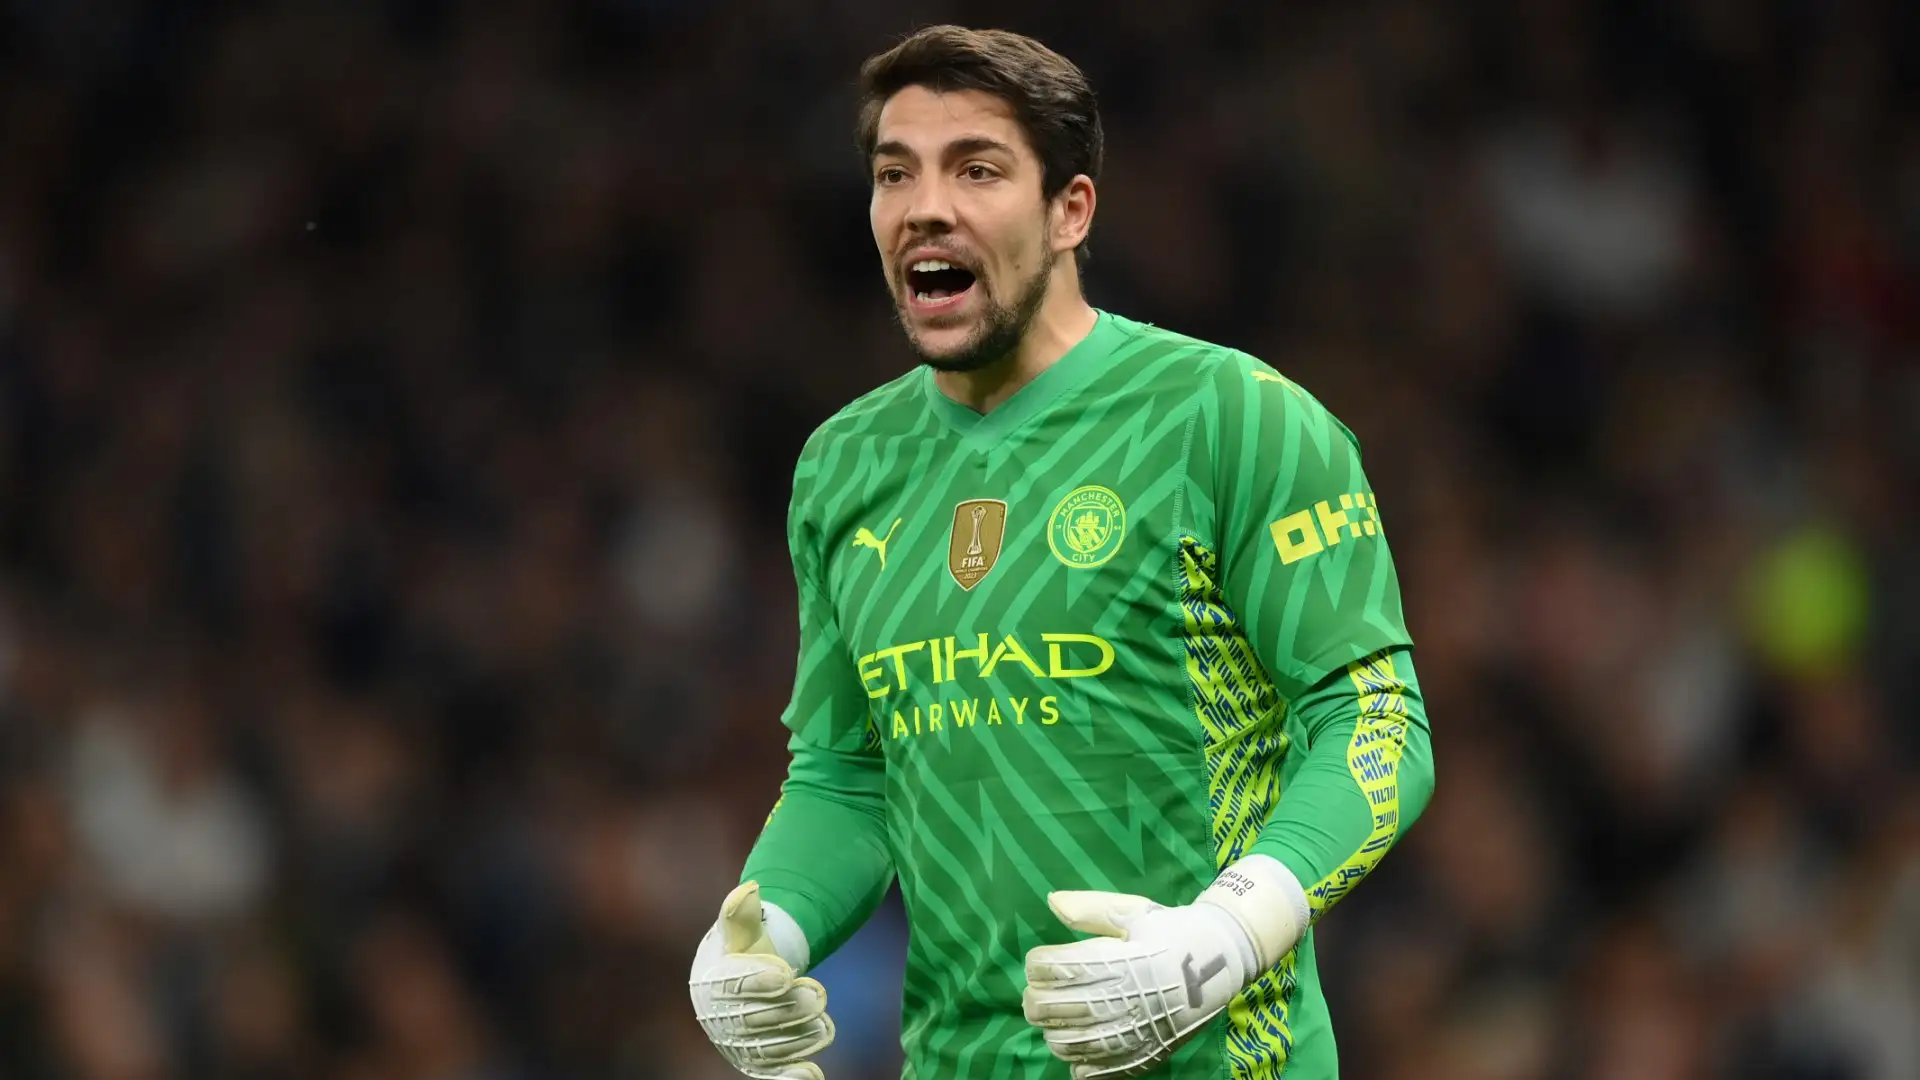 'Otherwise Arsenal are champions' - Pep Guardiola hails Stefan Ortega's heroics after goalkeeper replaces injured Ederson for Man City